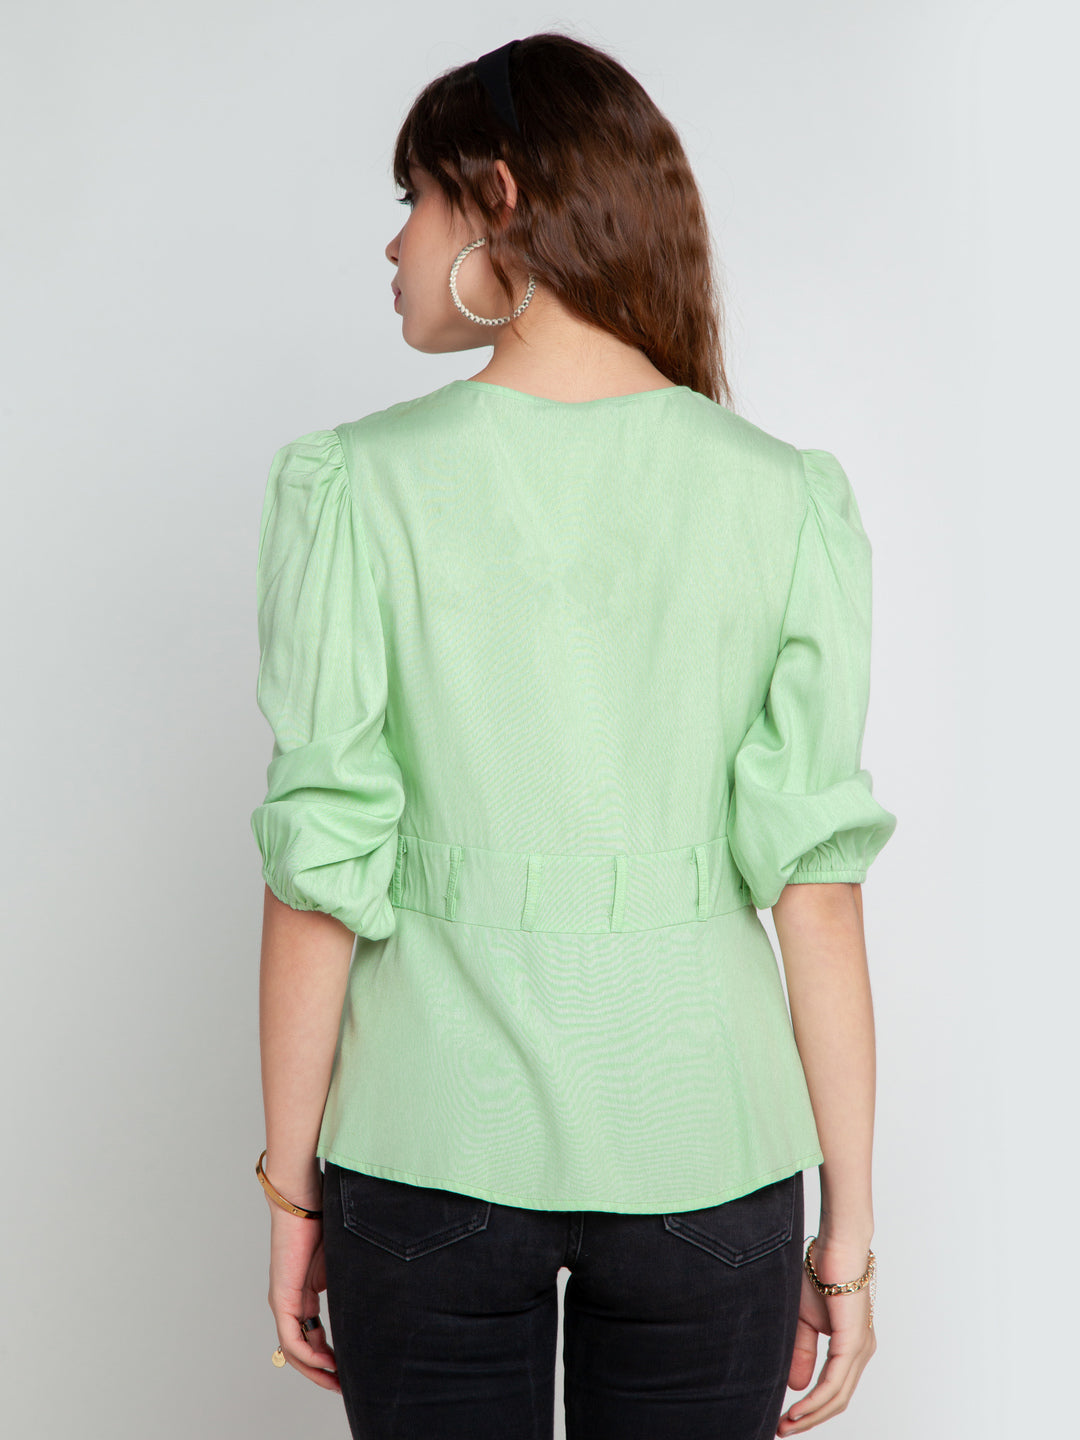 Green Solid Pleated Top For Women